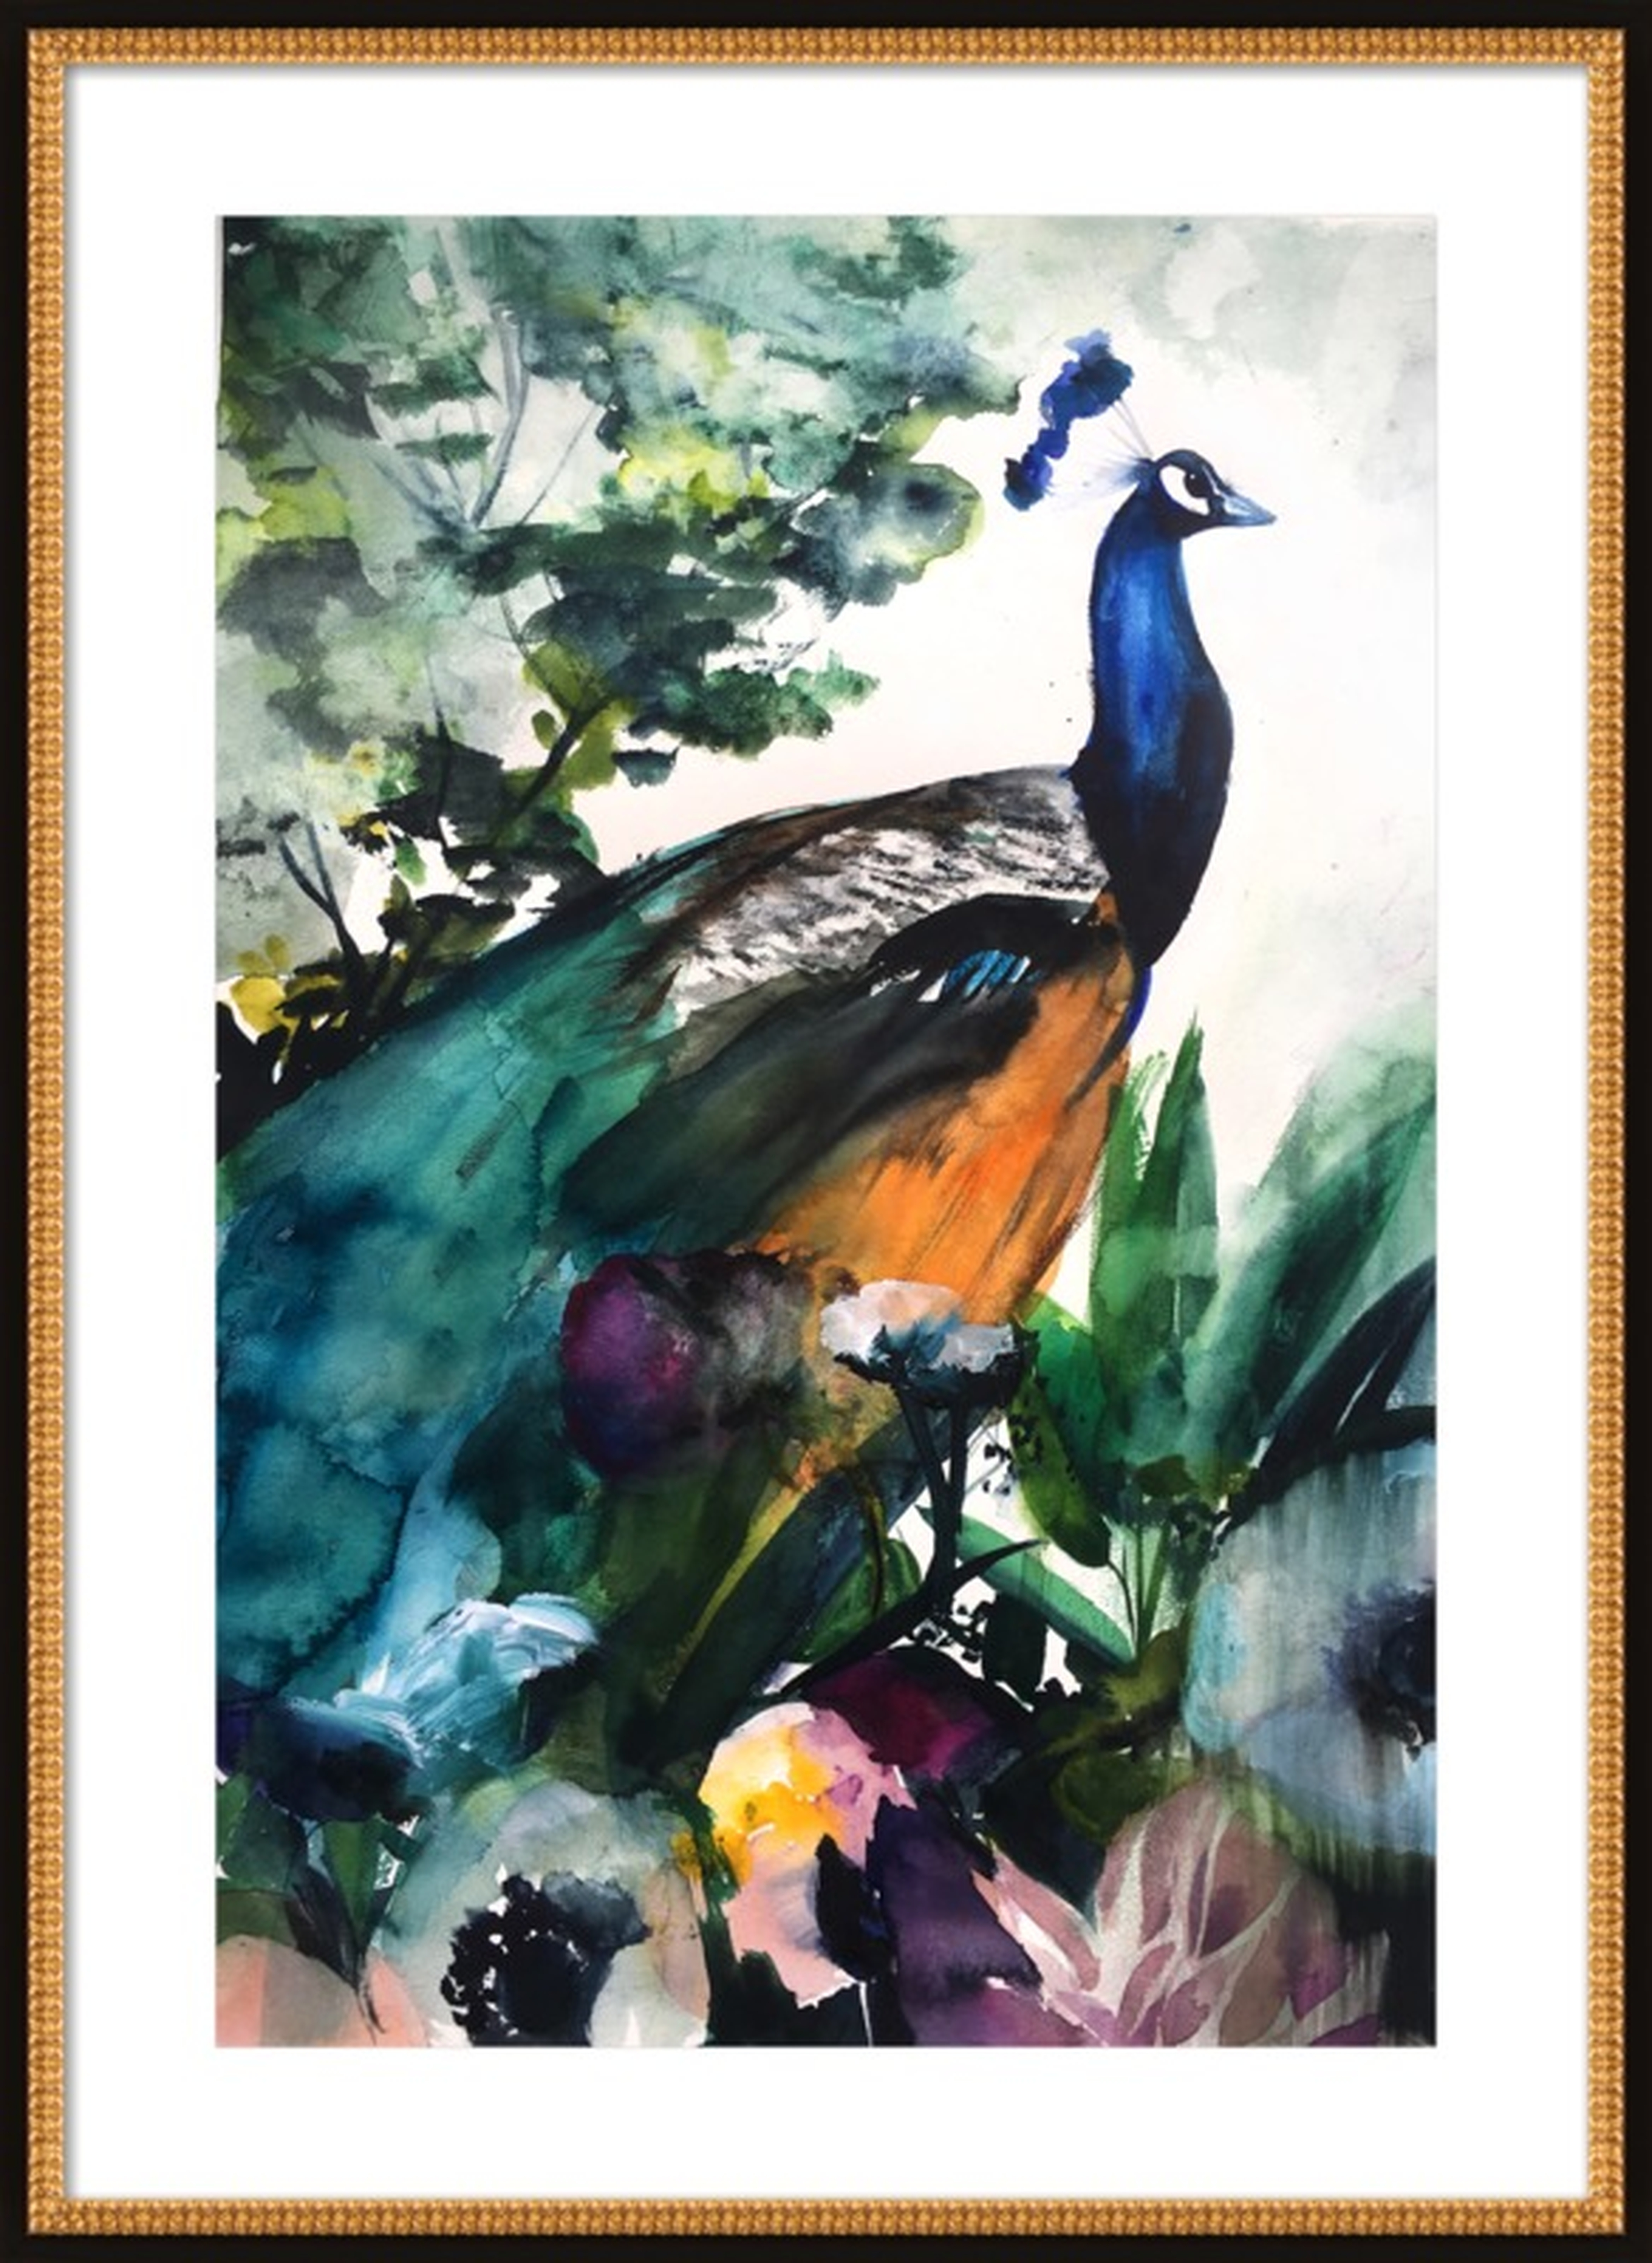 Peacock Garden - 32x44" - Flat Black Double Bead Wood Frame with Matte - Artfully Walls